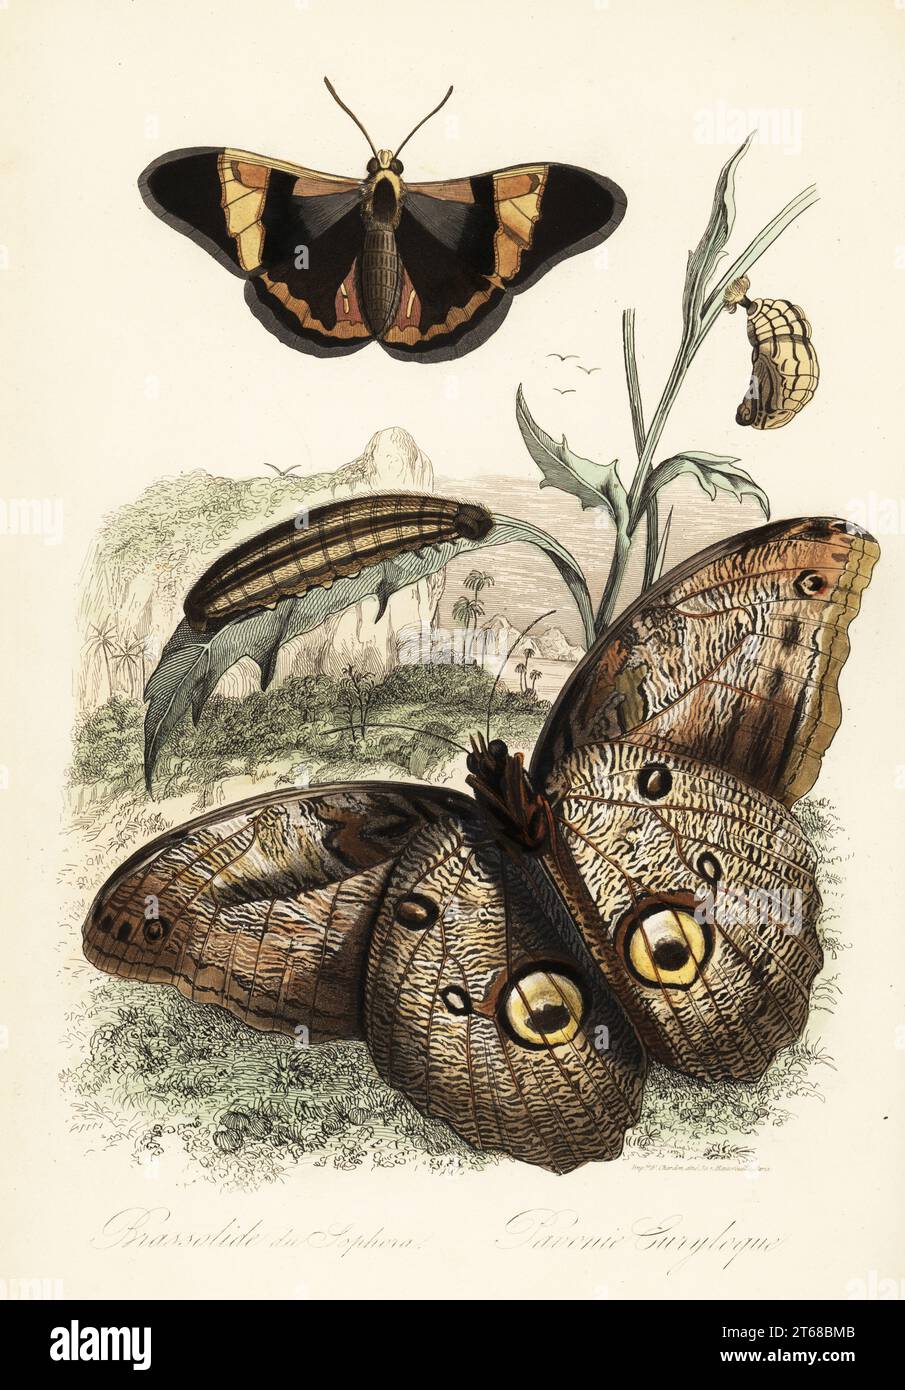 Brassolis sophorae butterfly, pupa and larva caterpillar (top) and forest giant owl, Caligo eurilochus (bottom). Brassolide du Sophora, Pavonie Euryloque. Illustration copied from Felix-Edouard Guerin-Meneville's Dictionnaire Pittoresque d'Histoire Naturelle. Handcoloured steel engraving printed by F. Chardon from Achille Comtes Musee dHistoire Naturelle, Museum of Natural History, Gustave Hazard, Paris, 1854. Stock Photo